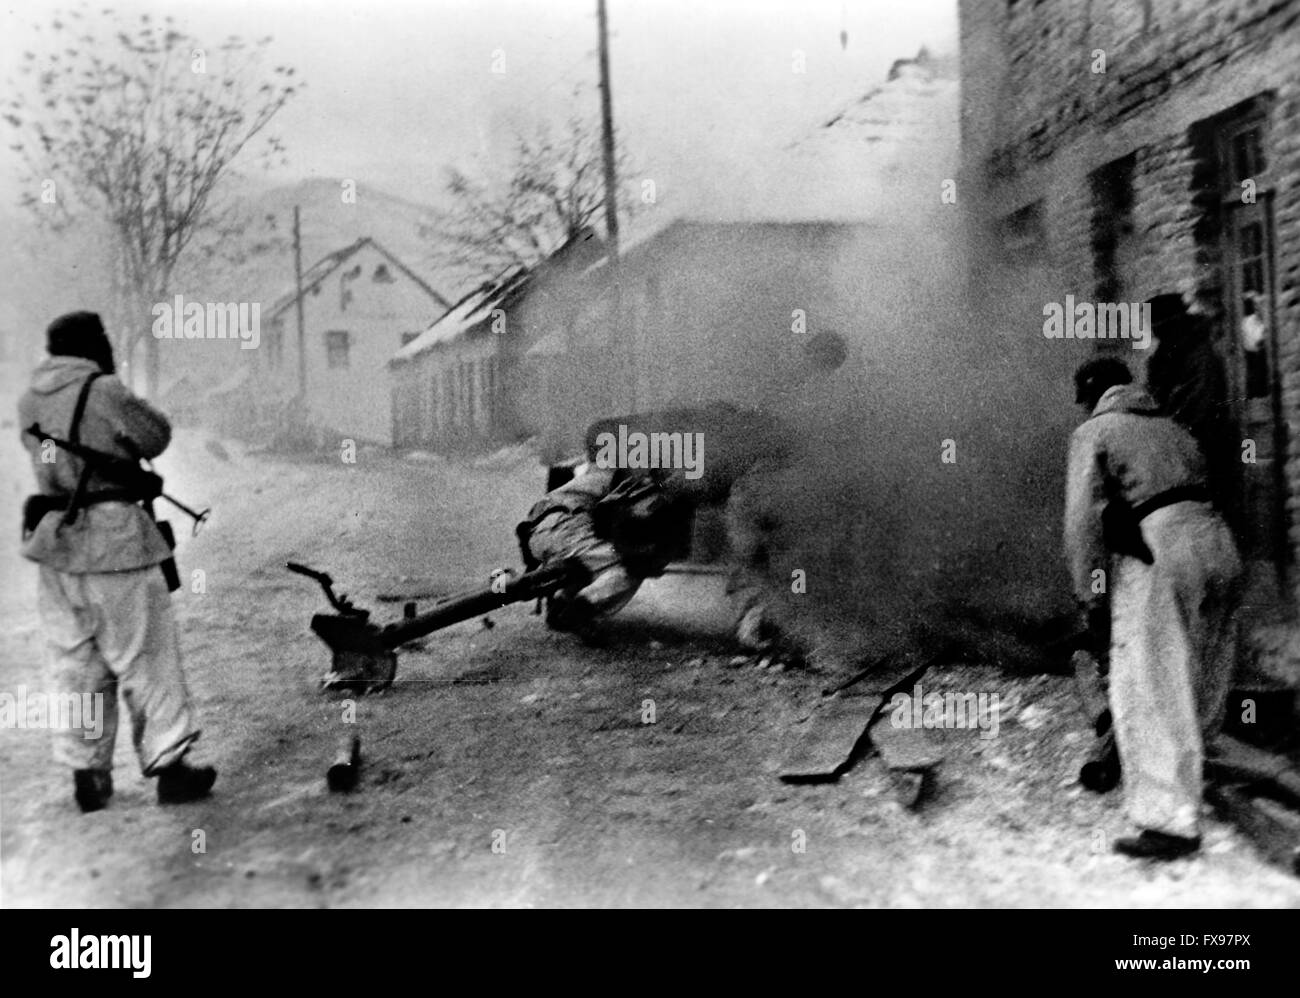 The Nazi propaganda image depicts soldiers of the German Wehrmacht at an anti-tank gun during the partisan combat in Yugoslavia. The photo was published in January 1944. Since summer 1942, the term 'partisan' had been prohibited by the Germans and replaced by 'Banden' (gangs), 'Banditen' (bandits), and 'Bandenbekaempfung' (fighting gangs). Fotoarchiv für Zeitgeschichtee - NO WIRE SERVICE - Stock Photo